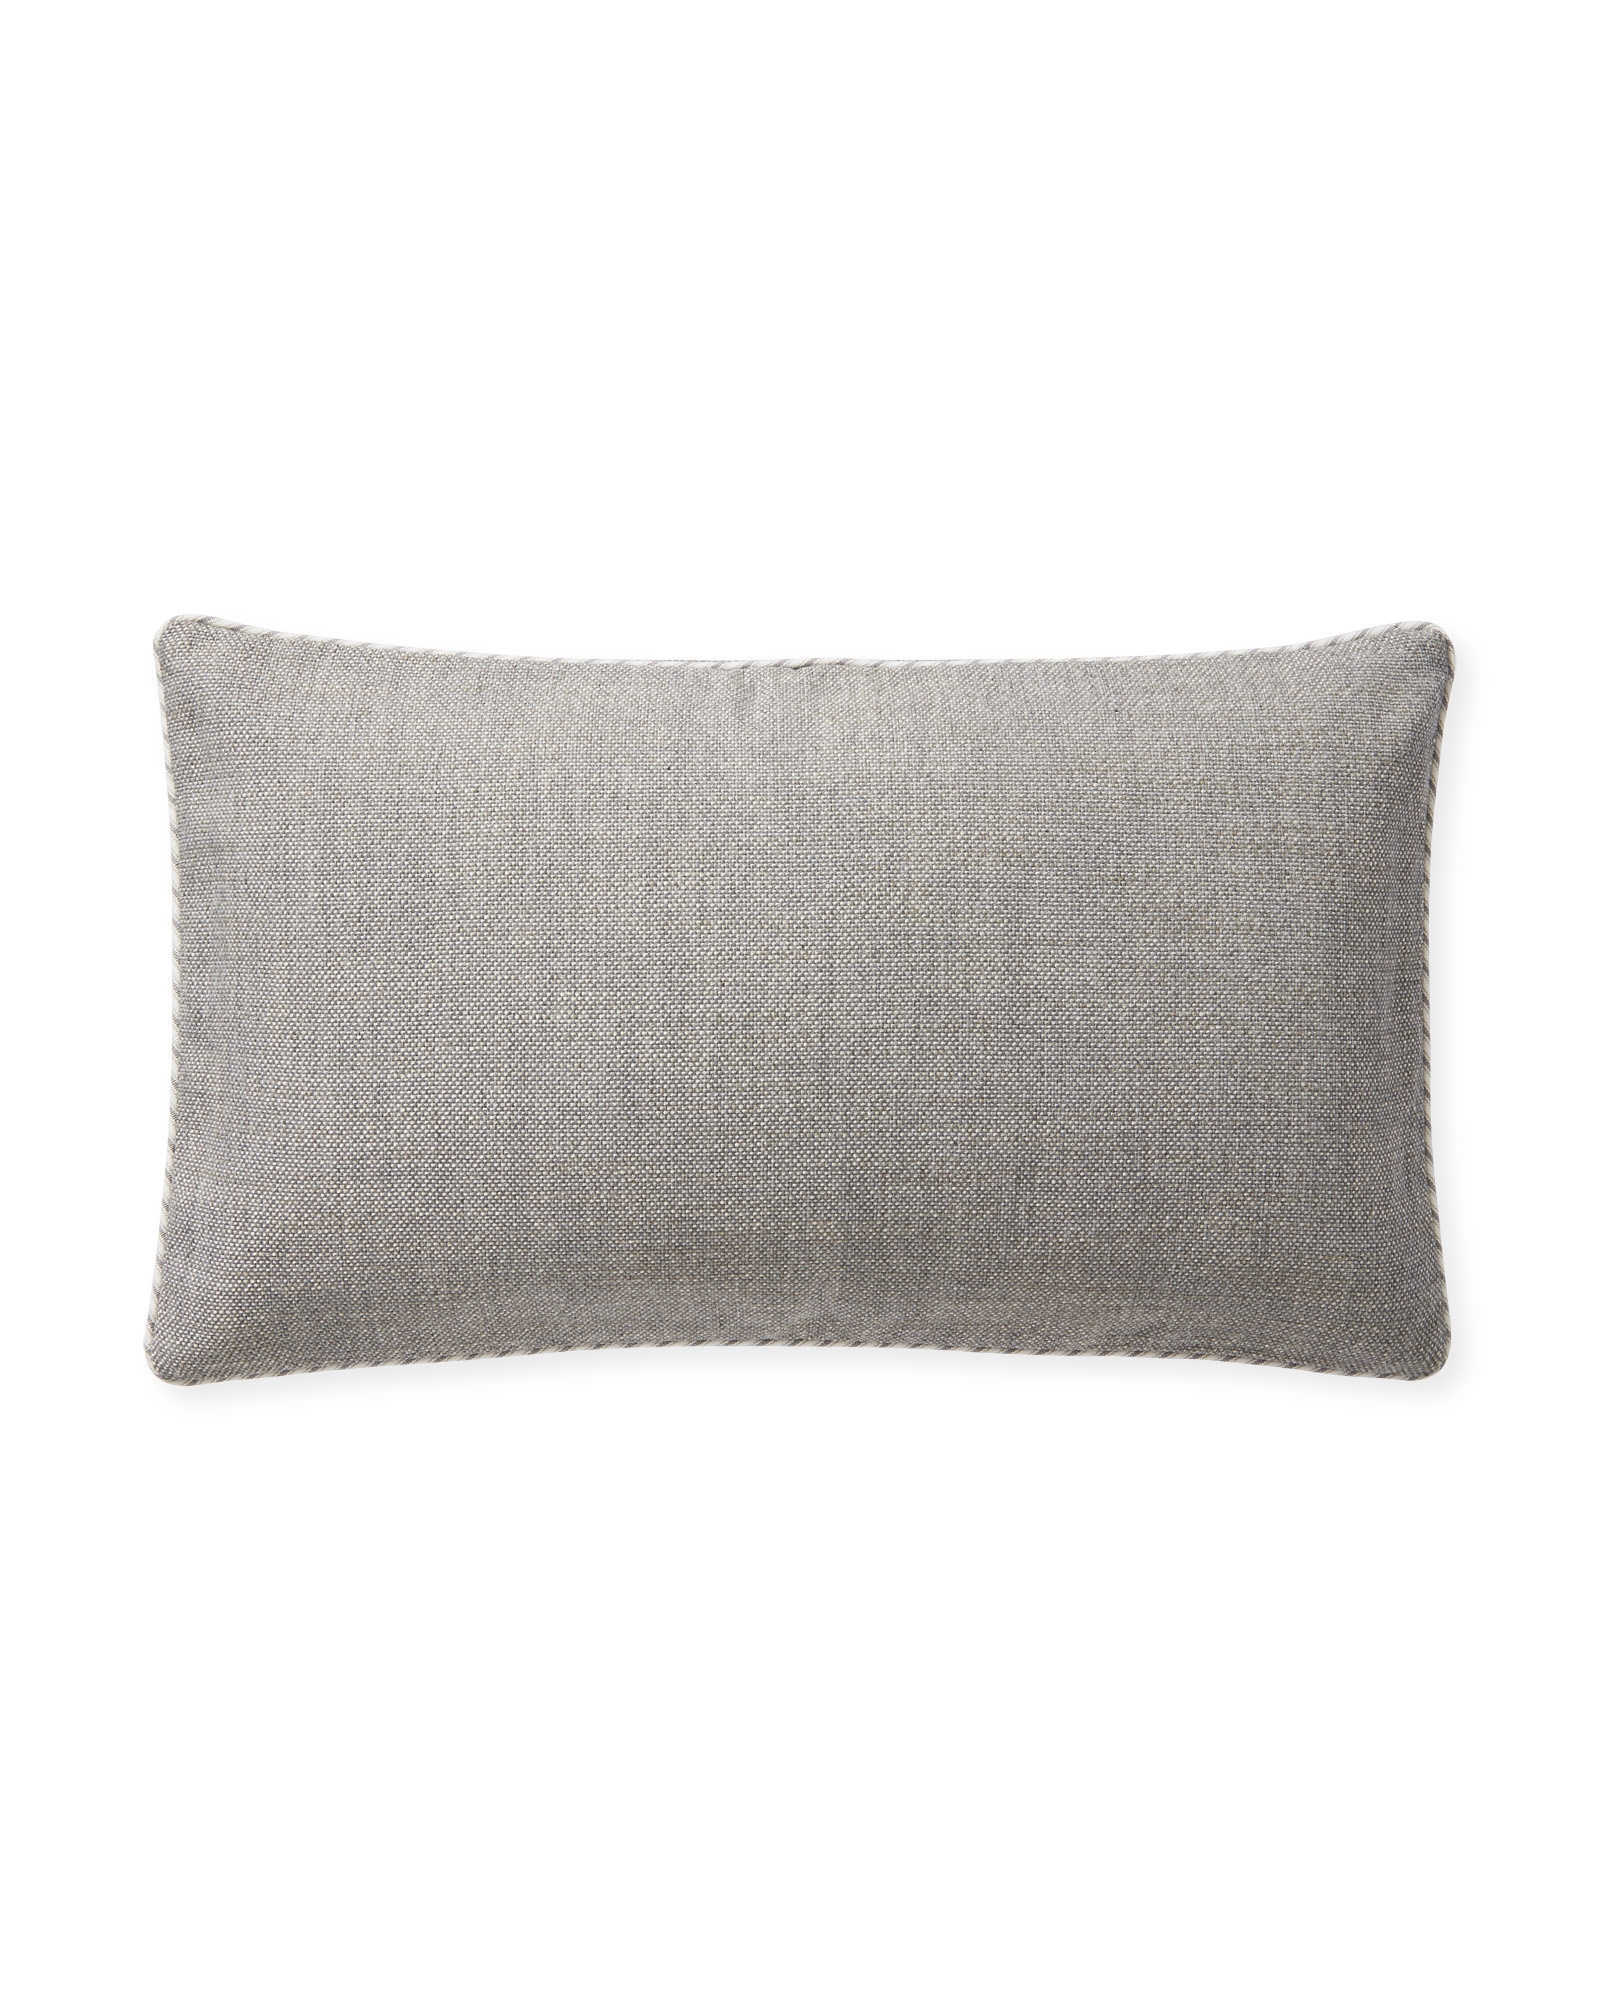 Perennials® Basketweave Outdoor Pillow Cover - Image 0